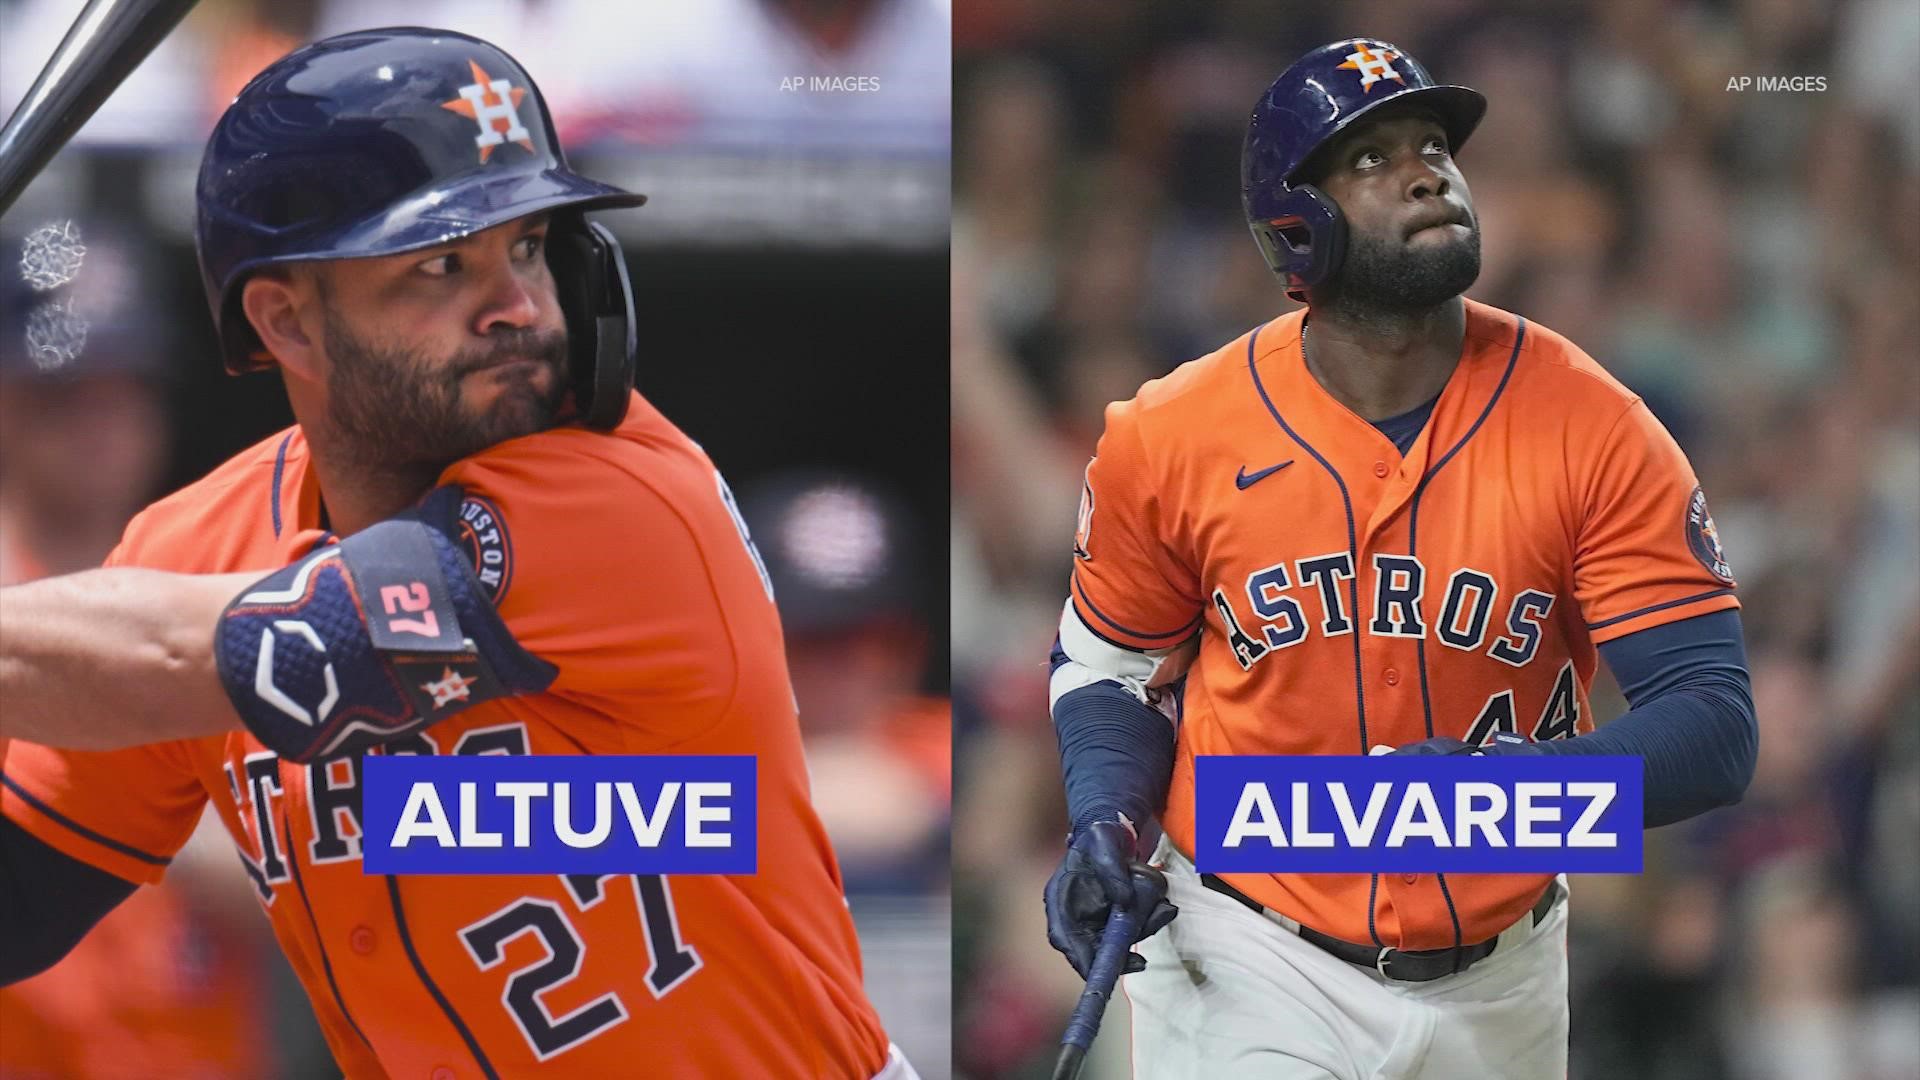 Astros Jose Altuve will be starting at second base in this year's MLB All-Star Game. Yordan Alvarez lost the starting spot to Angels Shohei Ohtani.